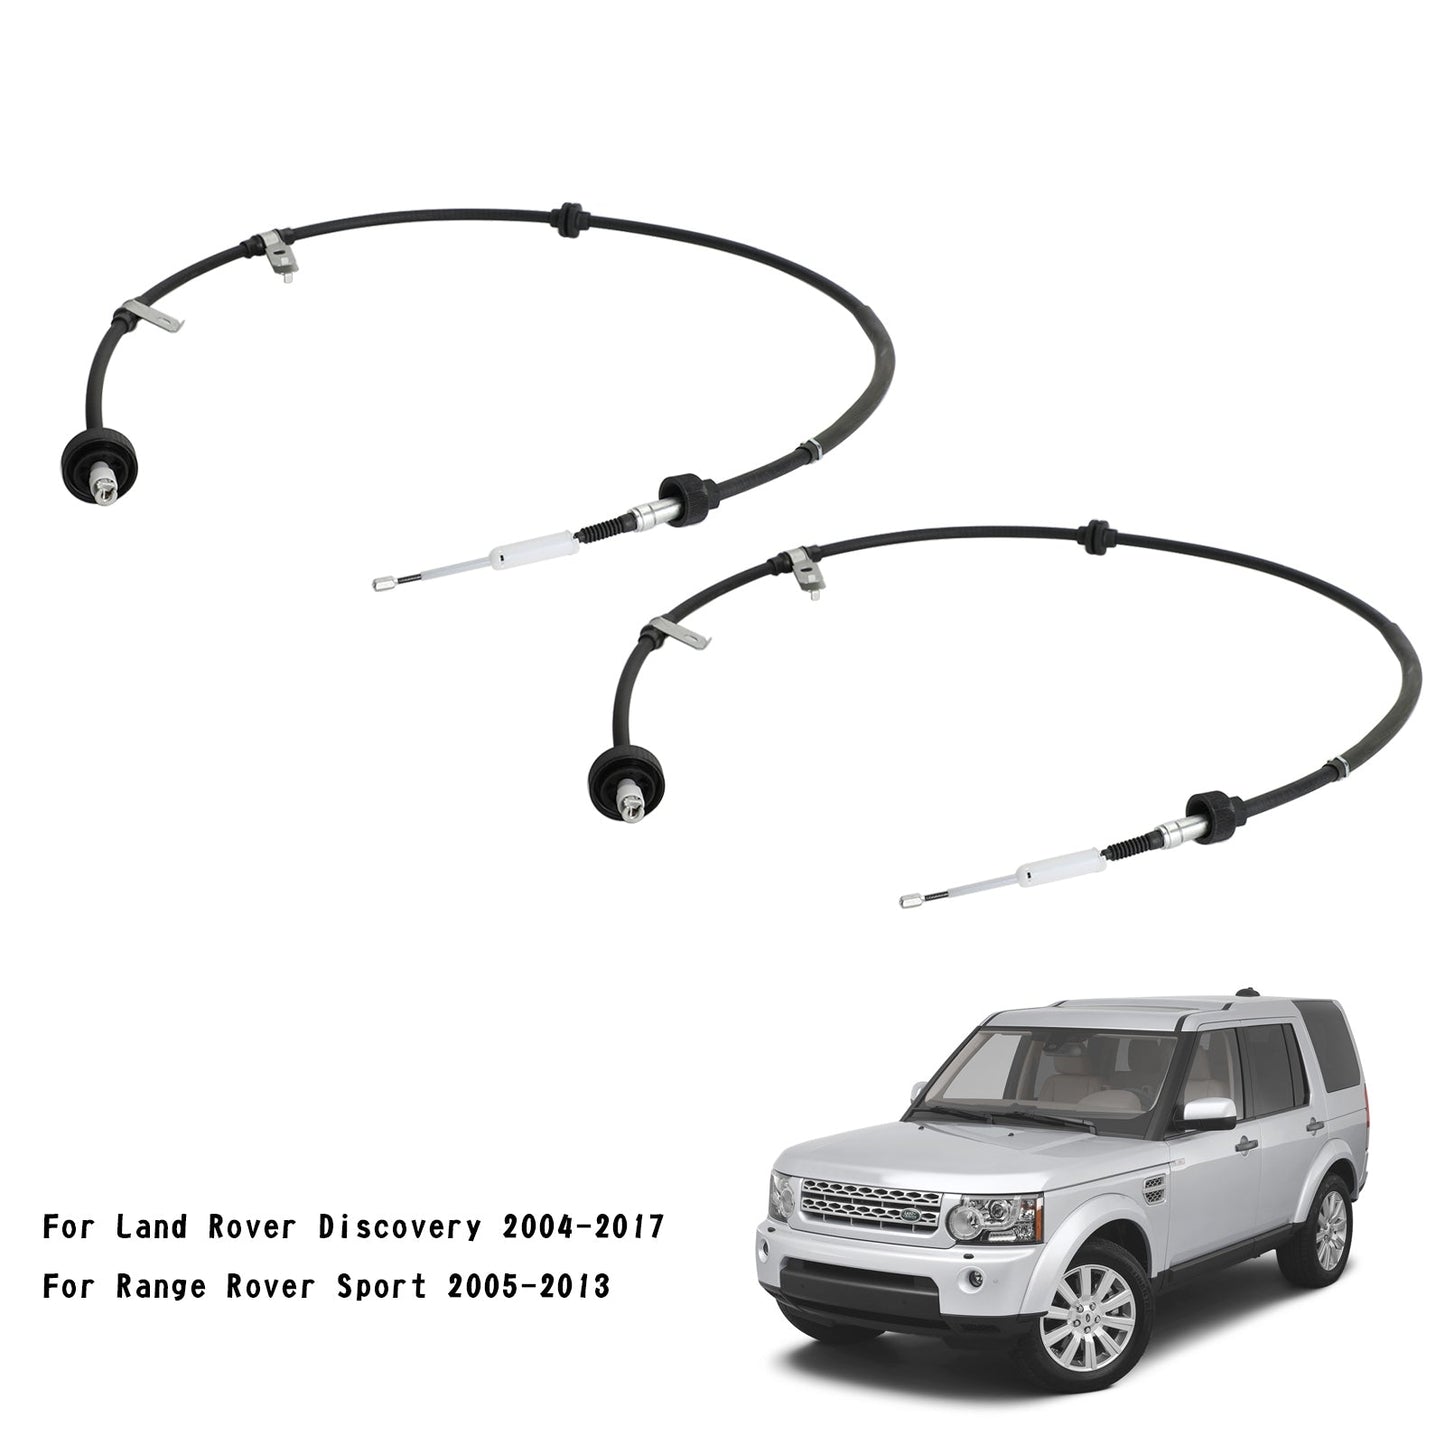 L+R Hand Brake Cables LR018470 For Land Rover Discovery 04-17 Range Rover Sport